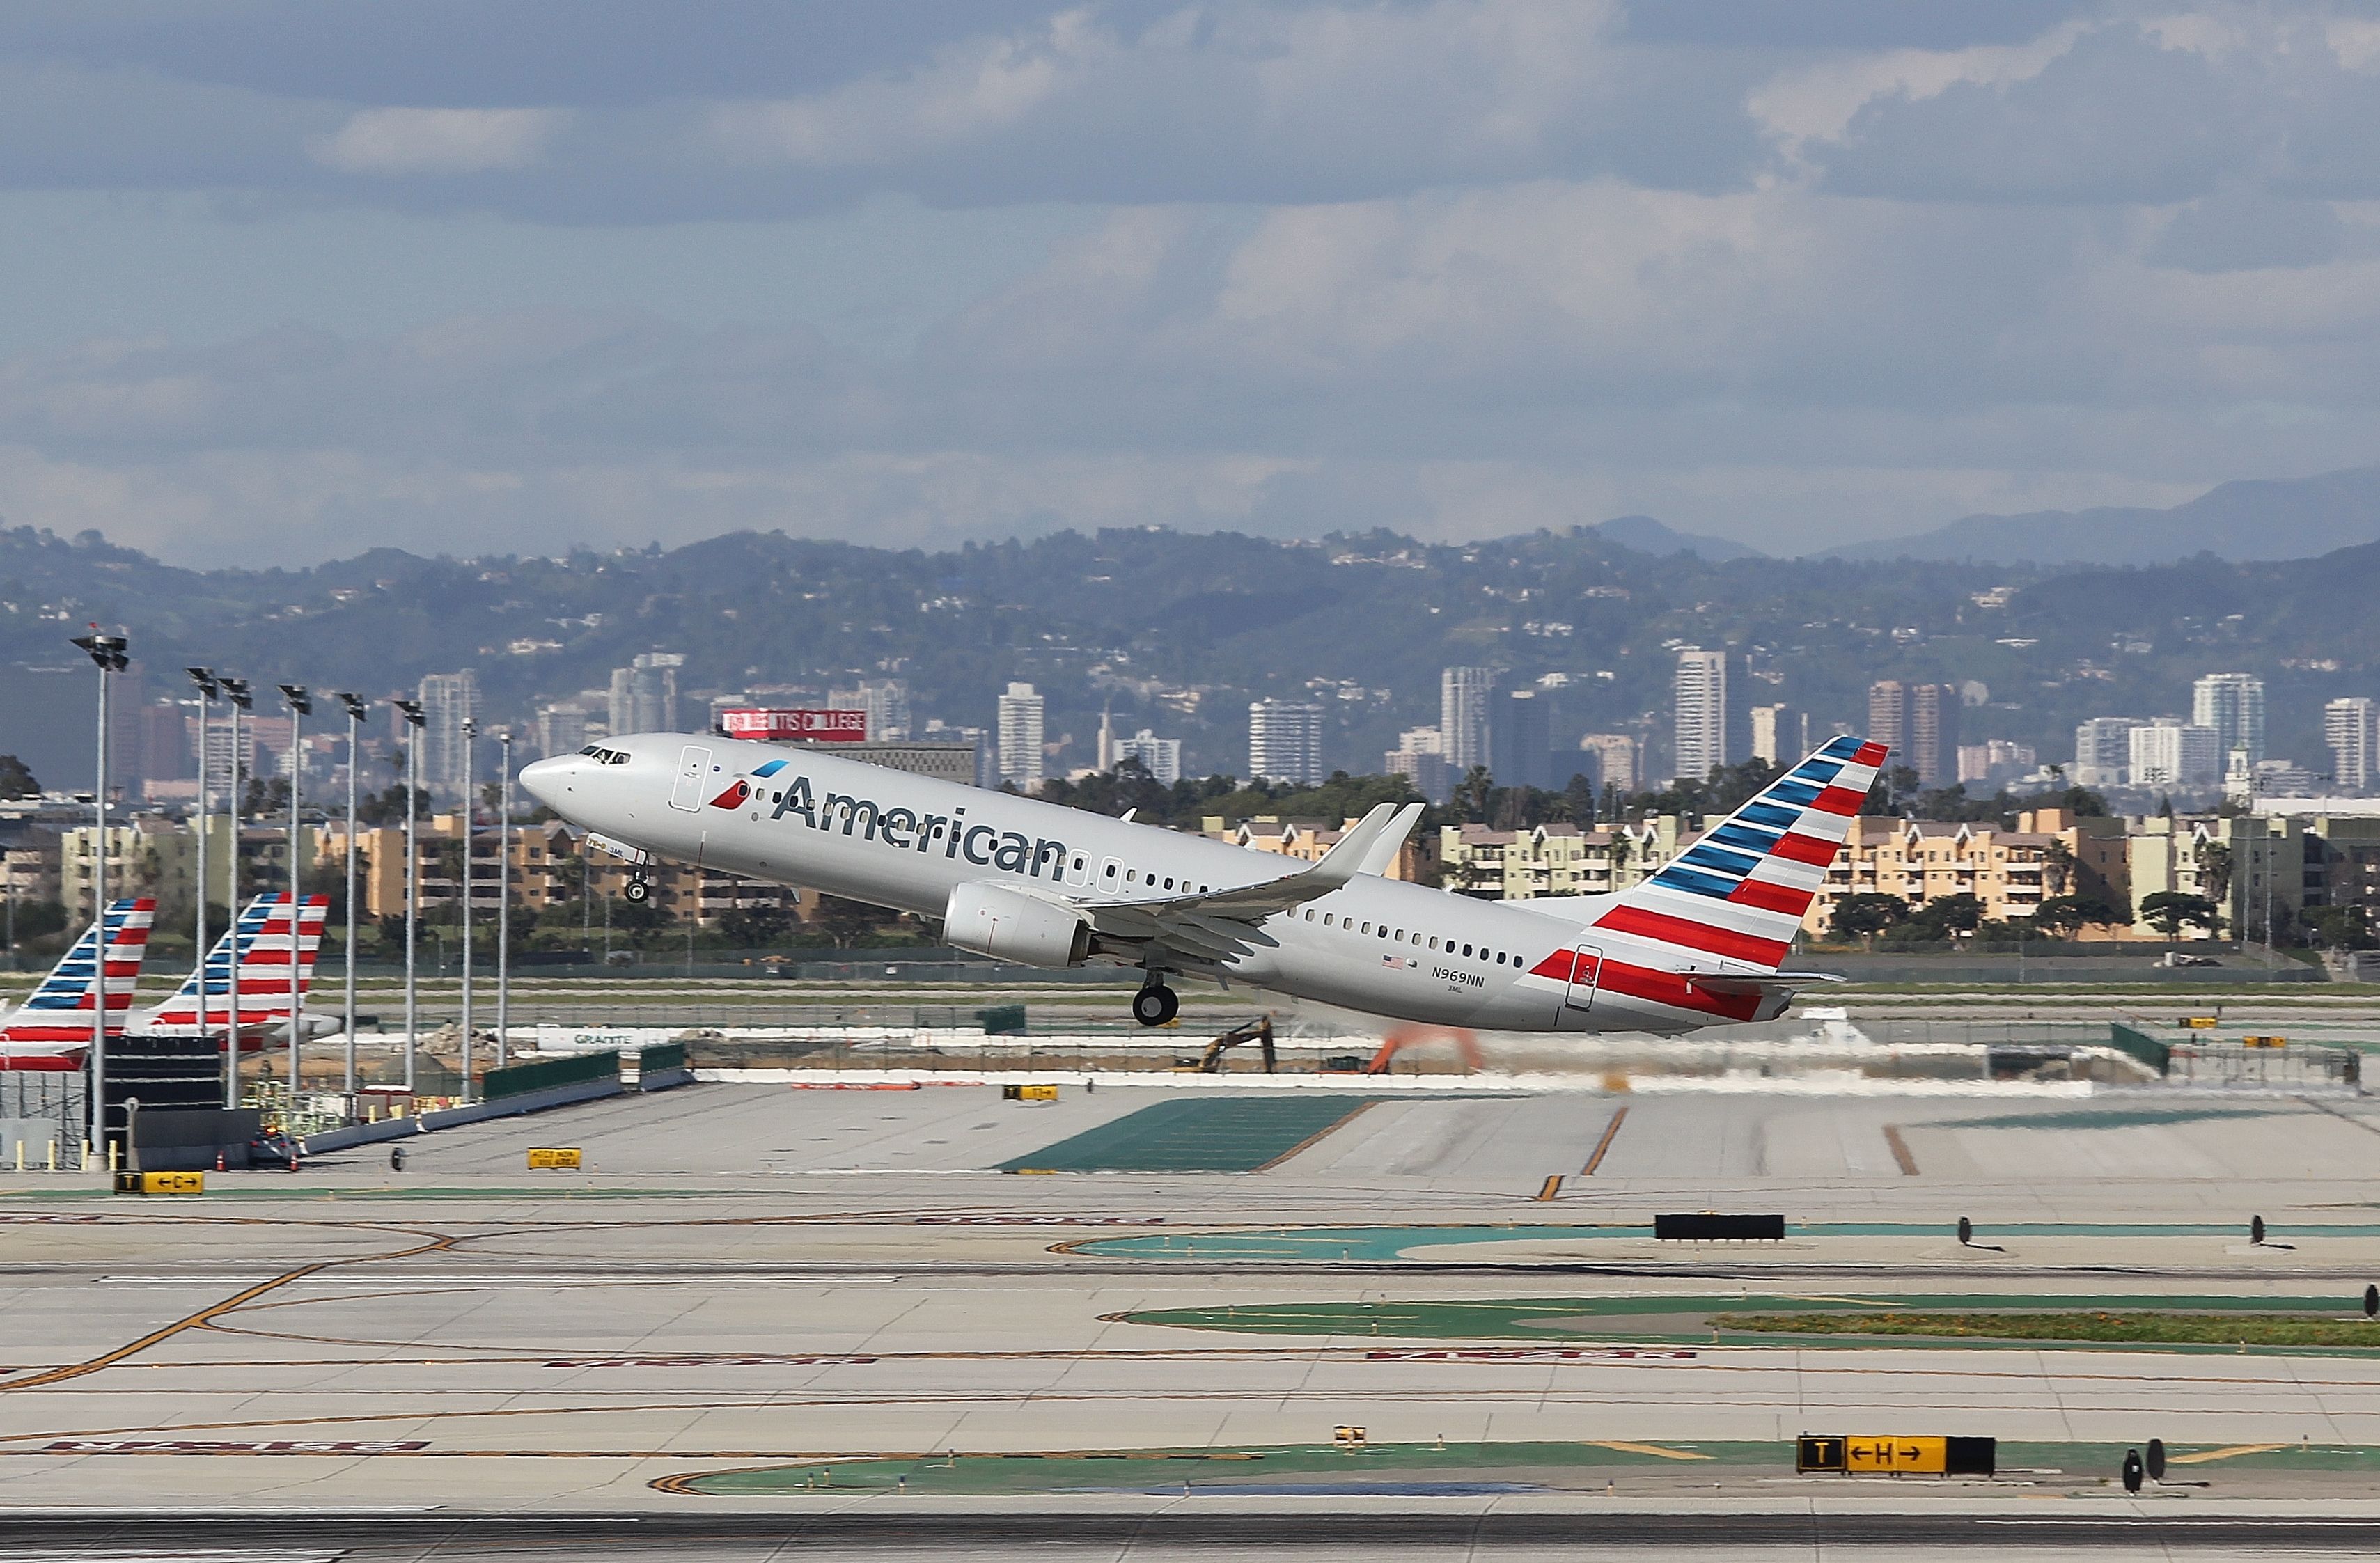 American Airlines plane taking off at LAX